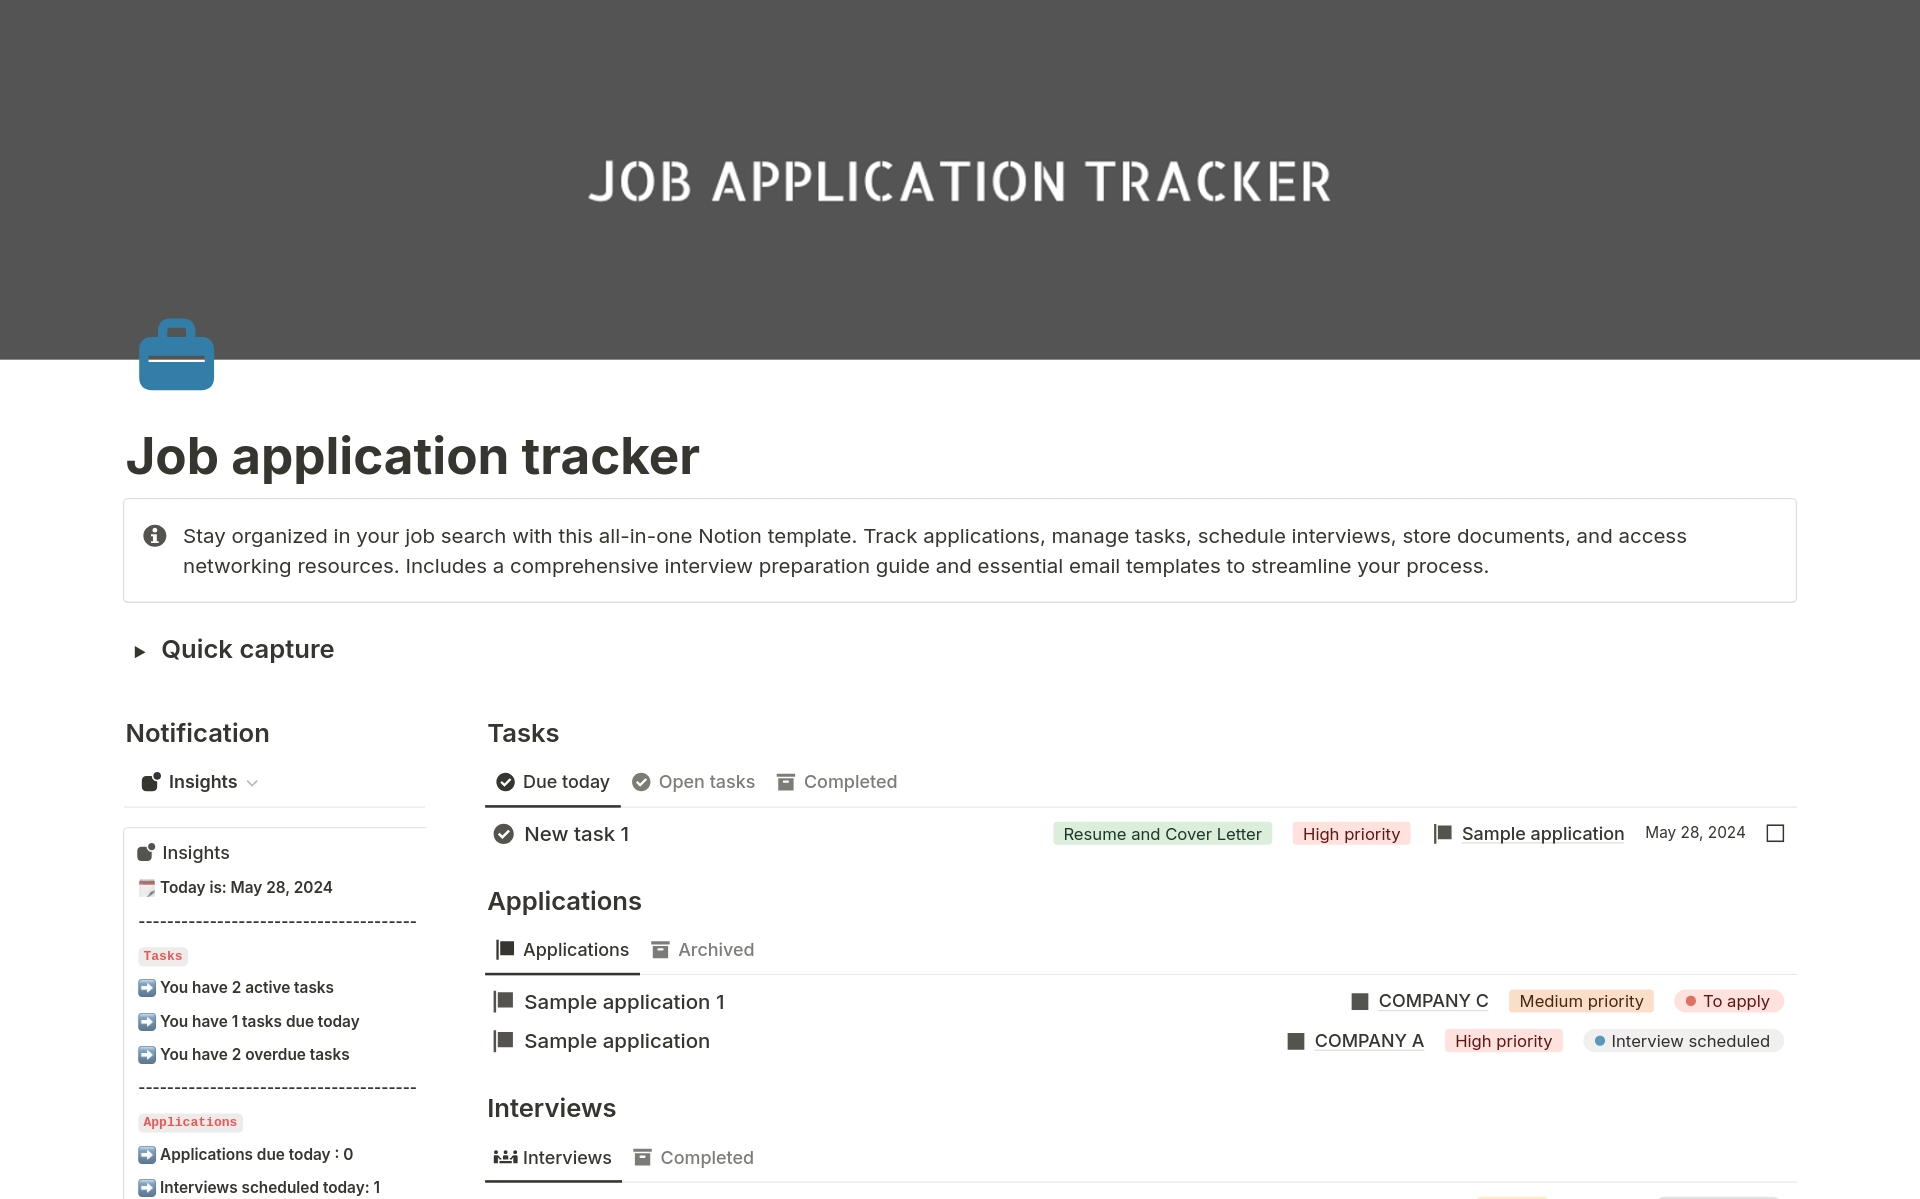 Stay organized in your job search with this all-in-one Notion template. Track applications, manage tasks, schedule interviews, store documents, and access networking resources. Includes a comprehensive interview preparation guide and essential email templates as well.